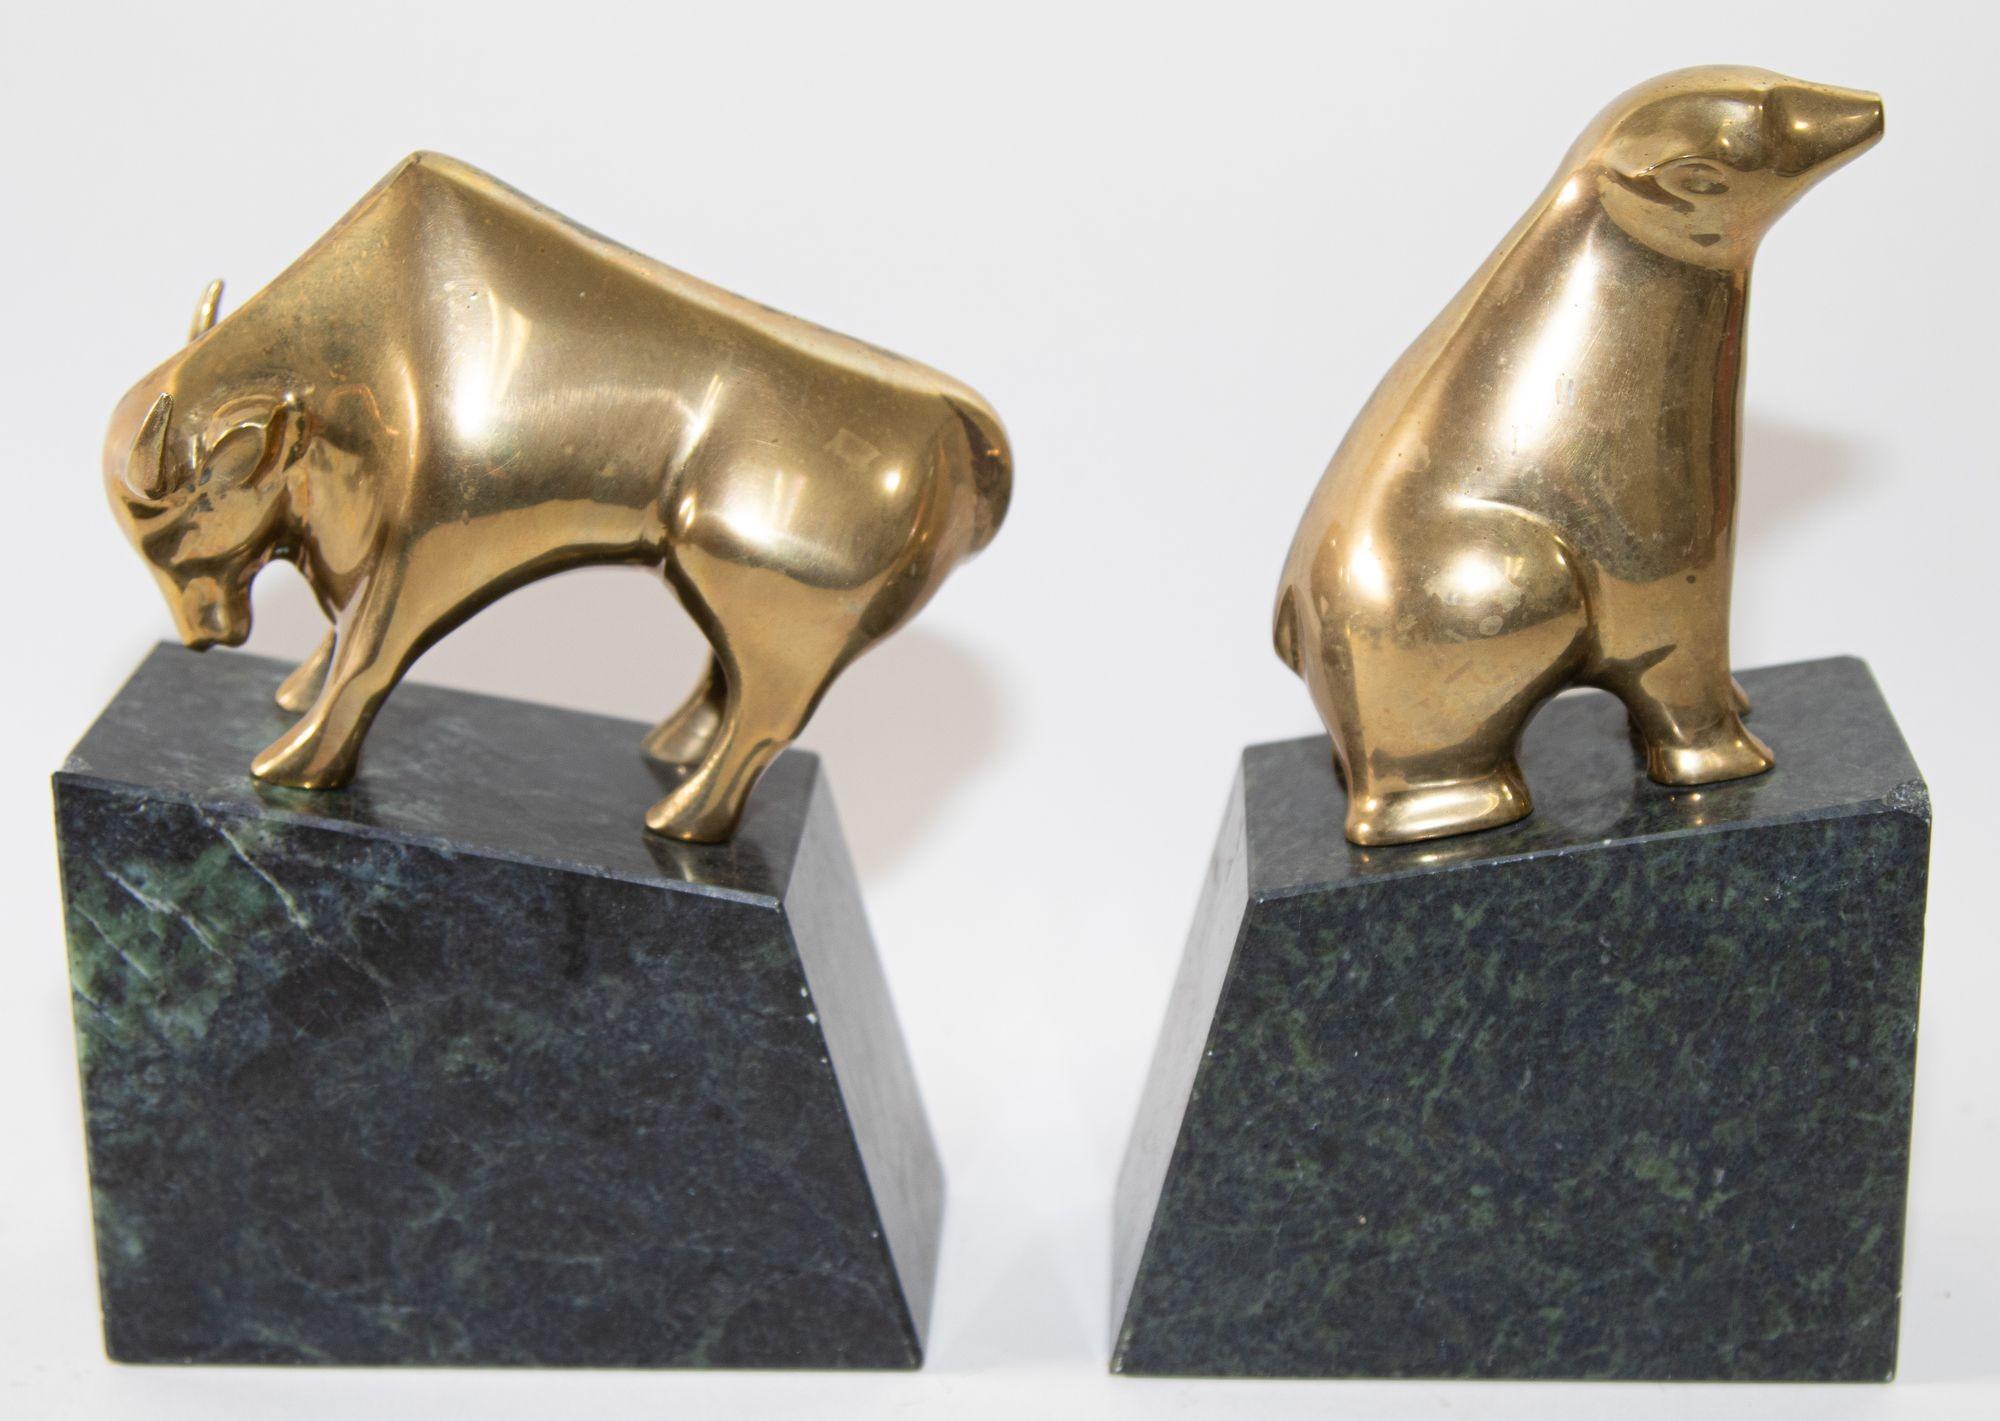 20th Century American Art Deco Polished Brass Bull and Bear Bookends Paperweights 1950s For Sale